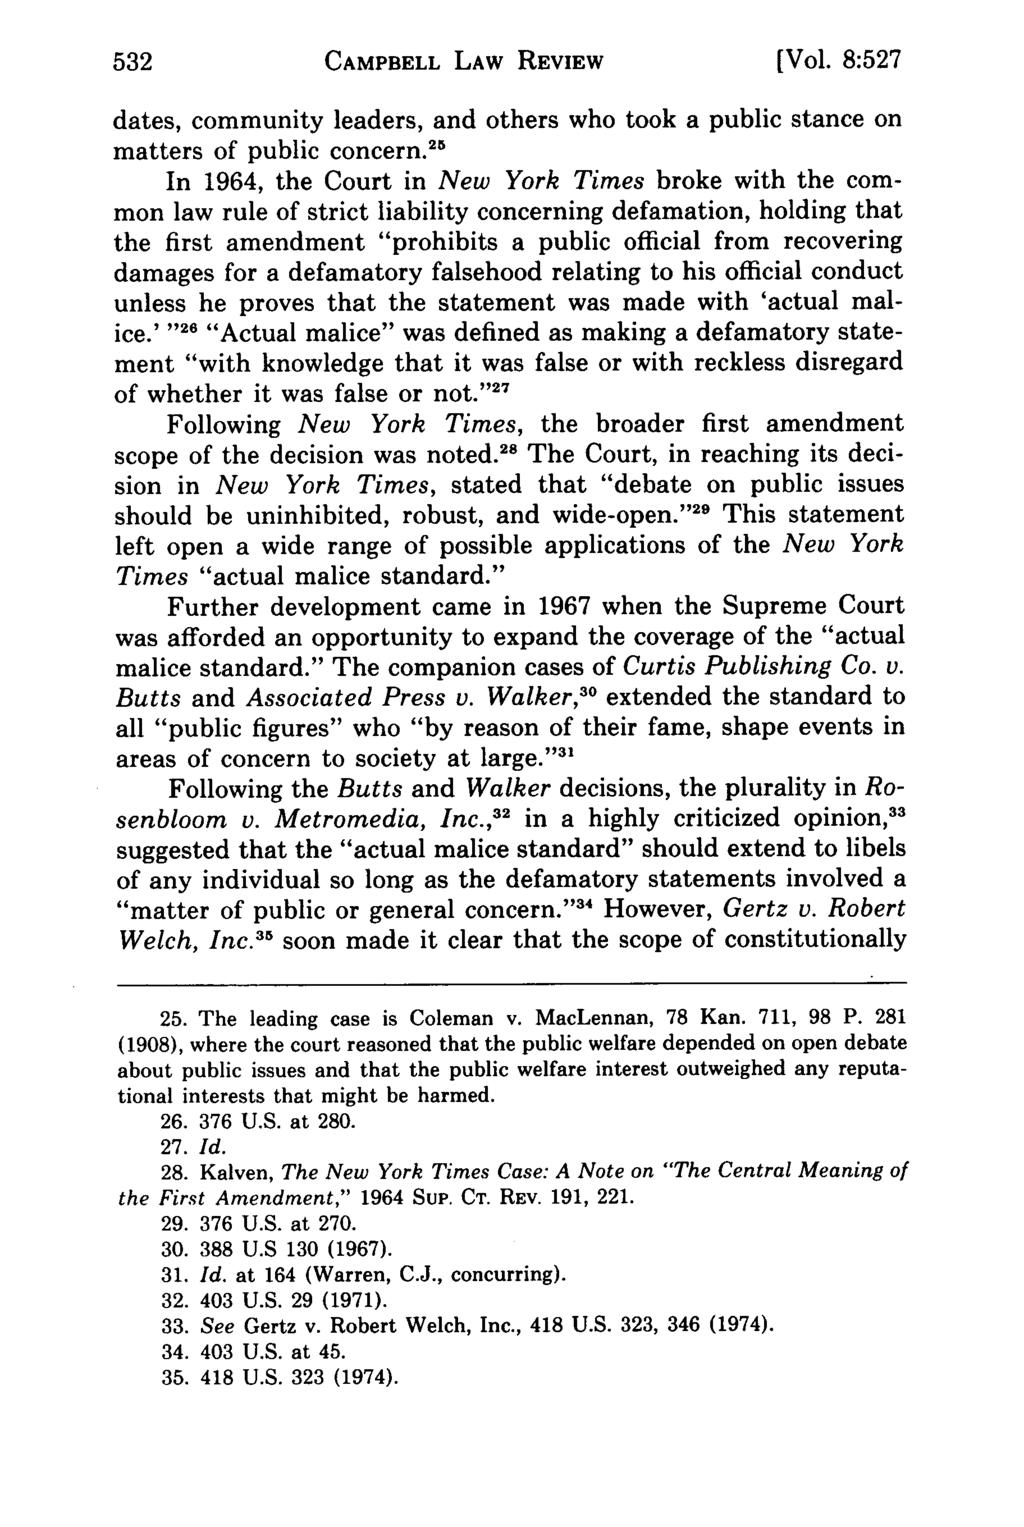 Campbell CAMPBELL Law Review, LAW Vol. REVIEW 8, Iss. 3 [1986], Art. 7 [Vol. 8:527 dates, community leaders, and others who took a public stance on matters of public concern.